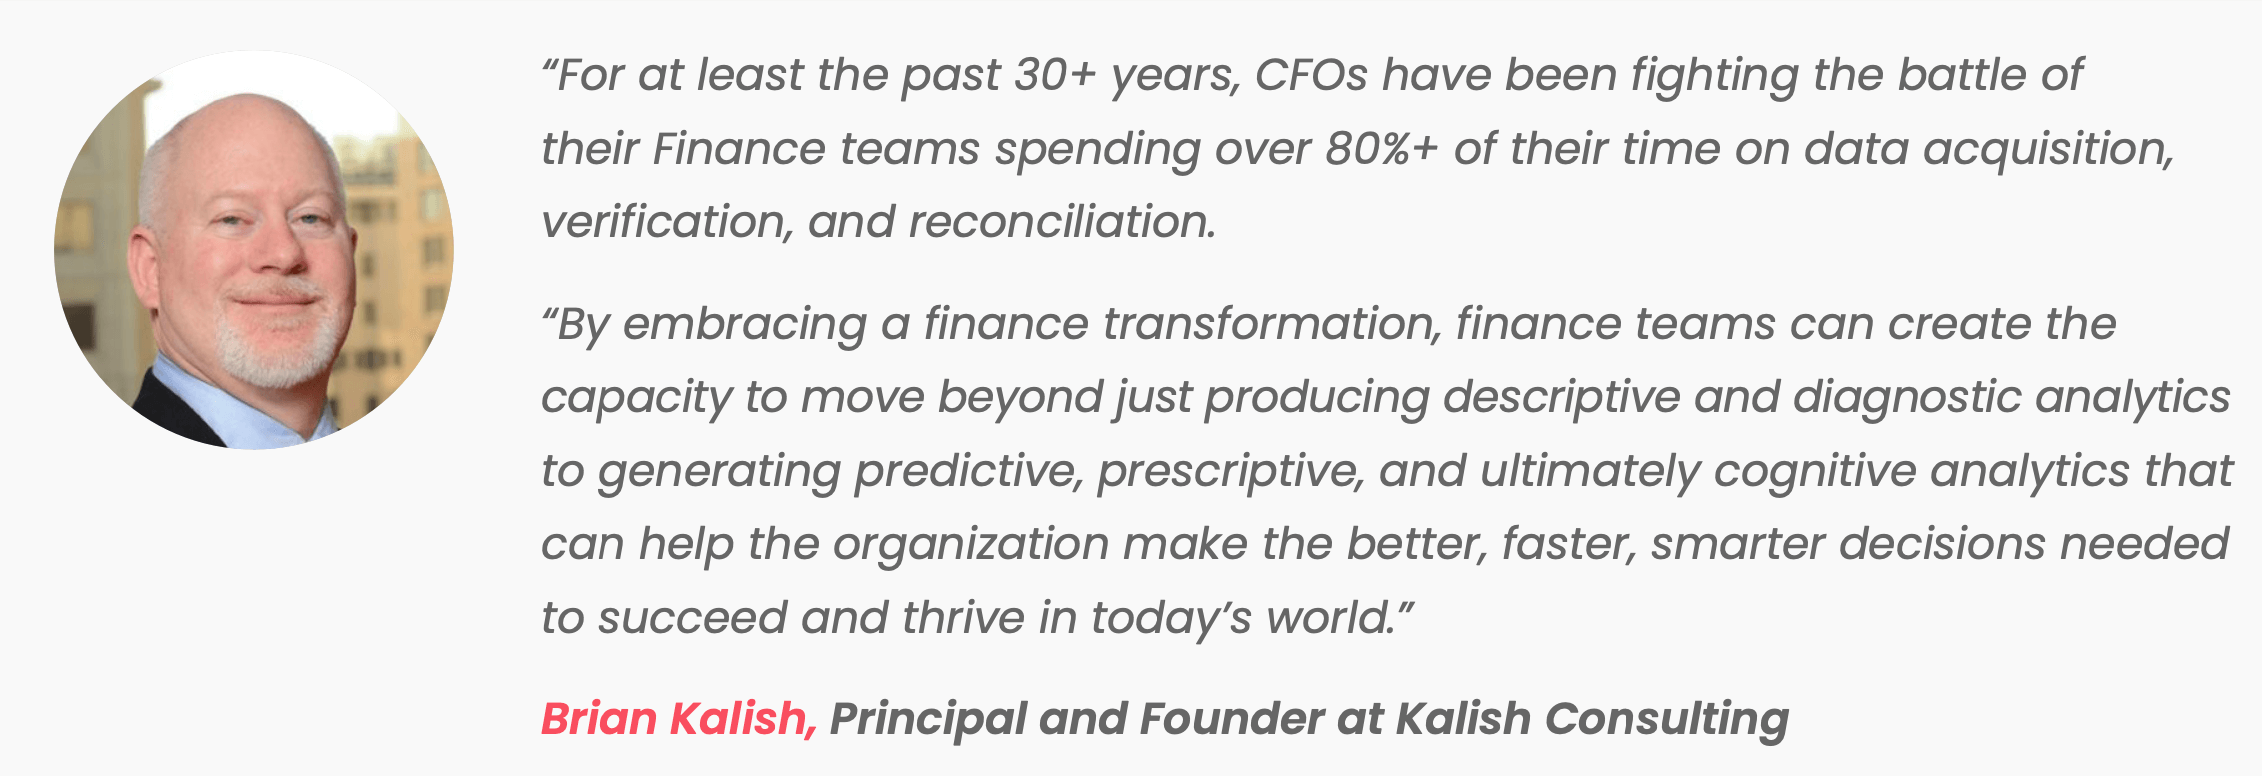 Benefits of finance transformation quote from Brian Kalish